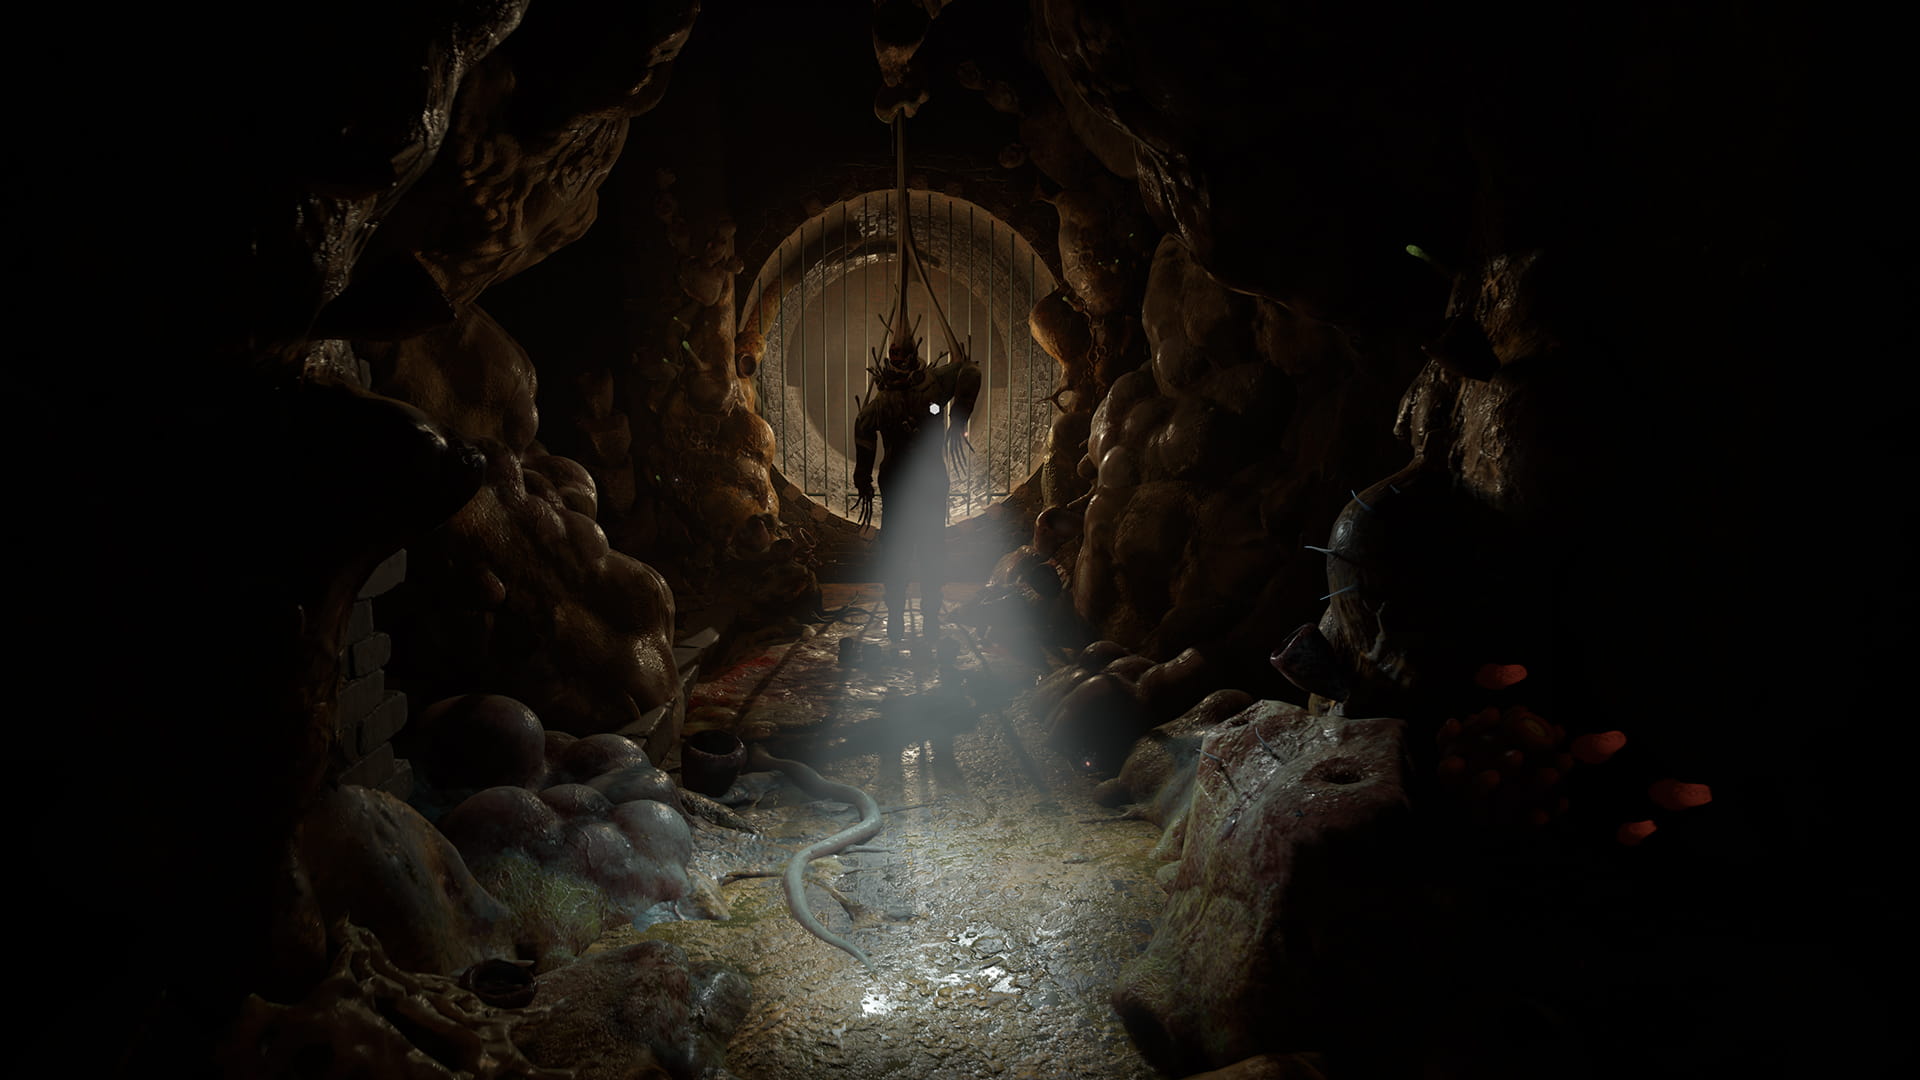 A pre-release screenshot of Half-Life: Alyx. A corpse dangles from above with a flashlight attached to it, surrounded by bulbous alien fungi.